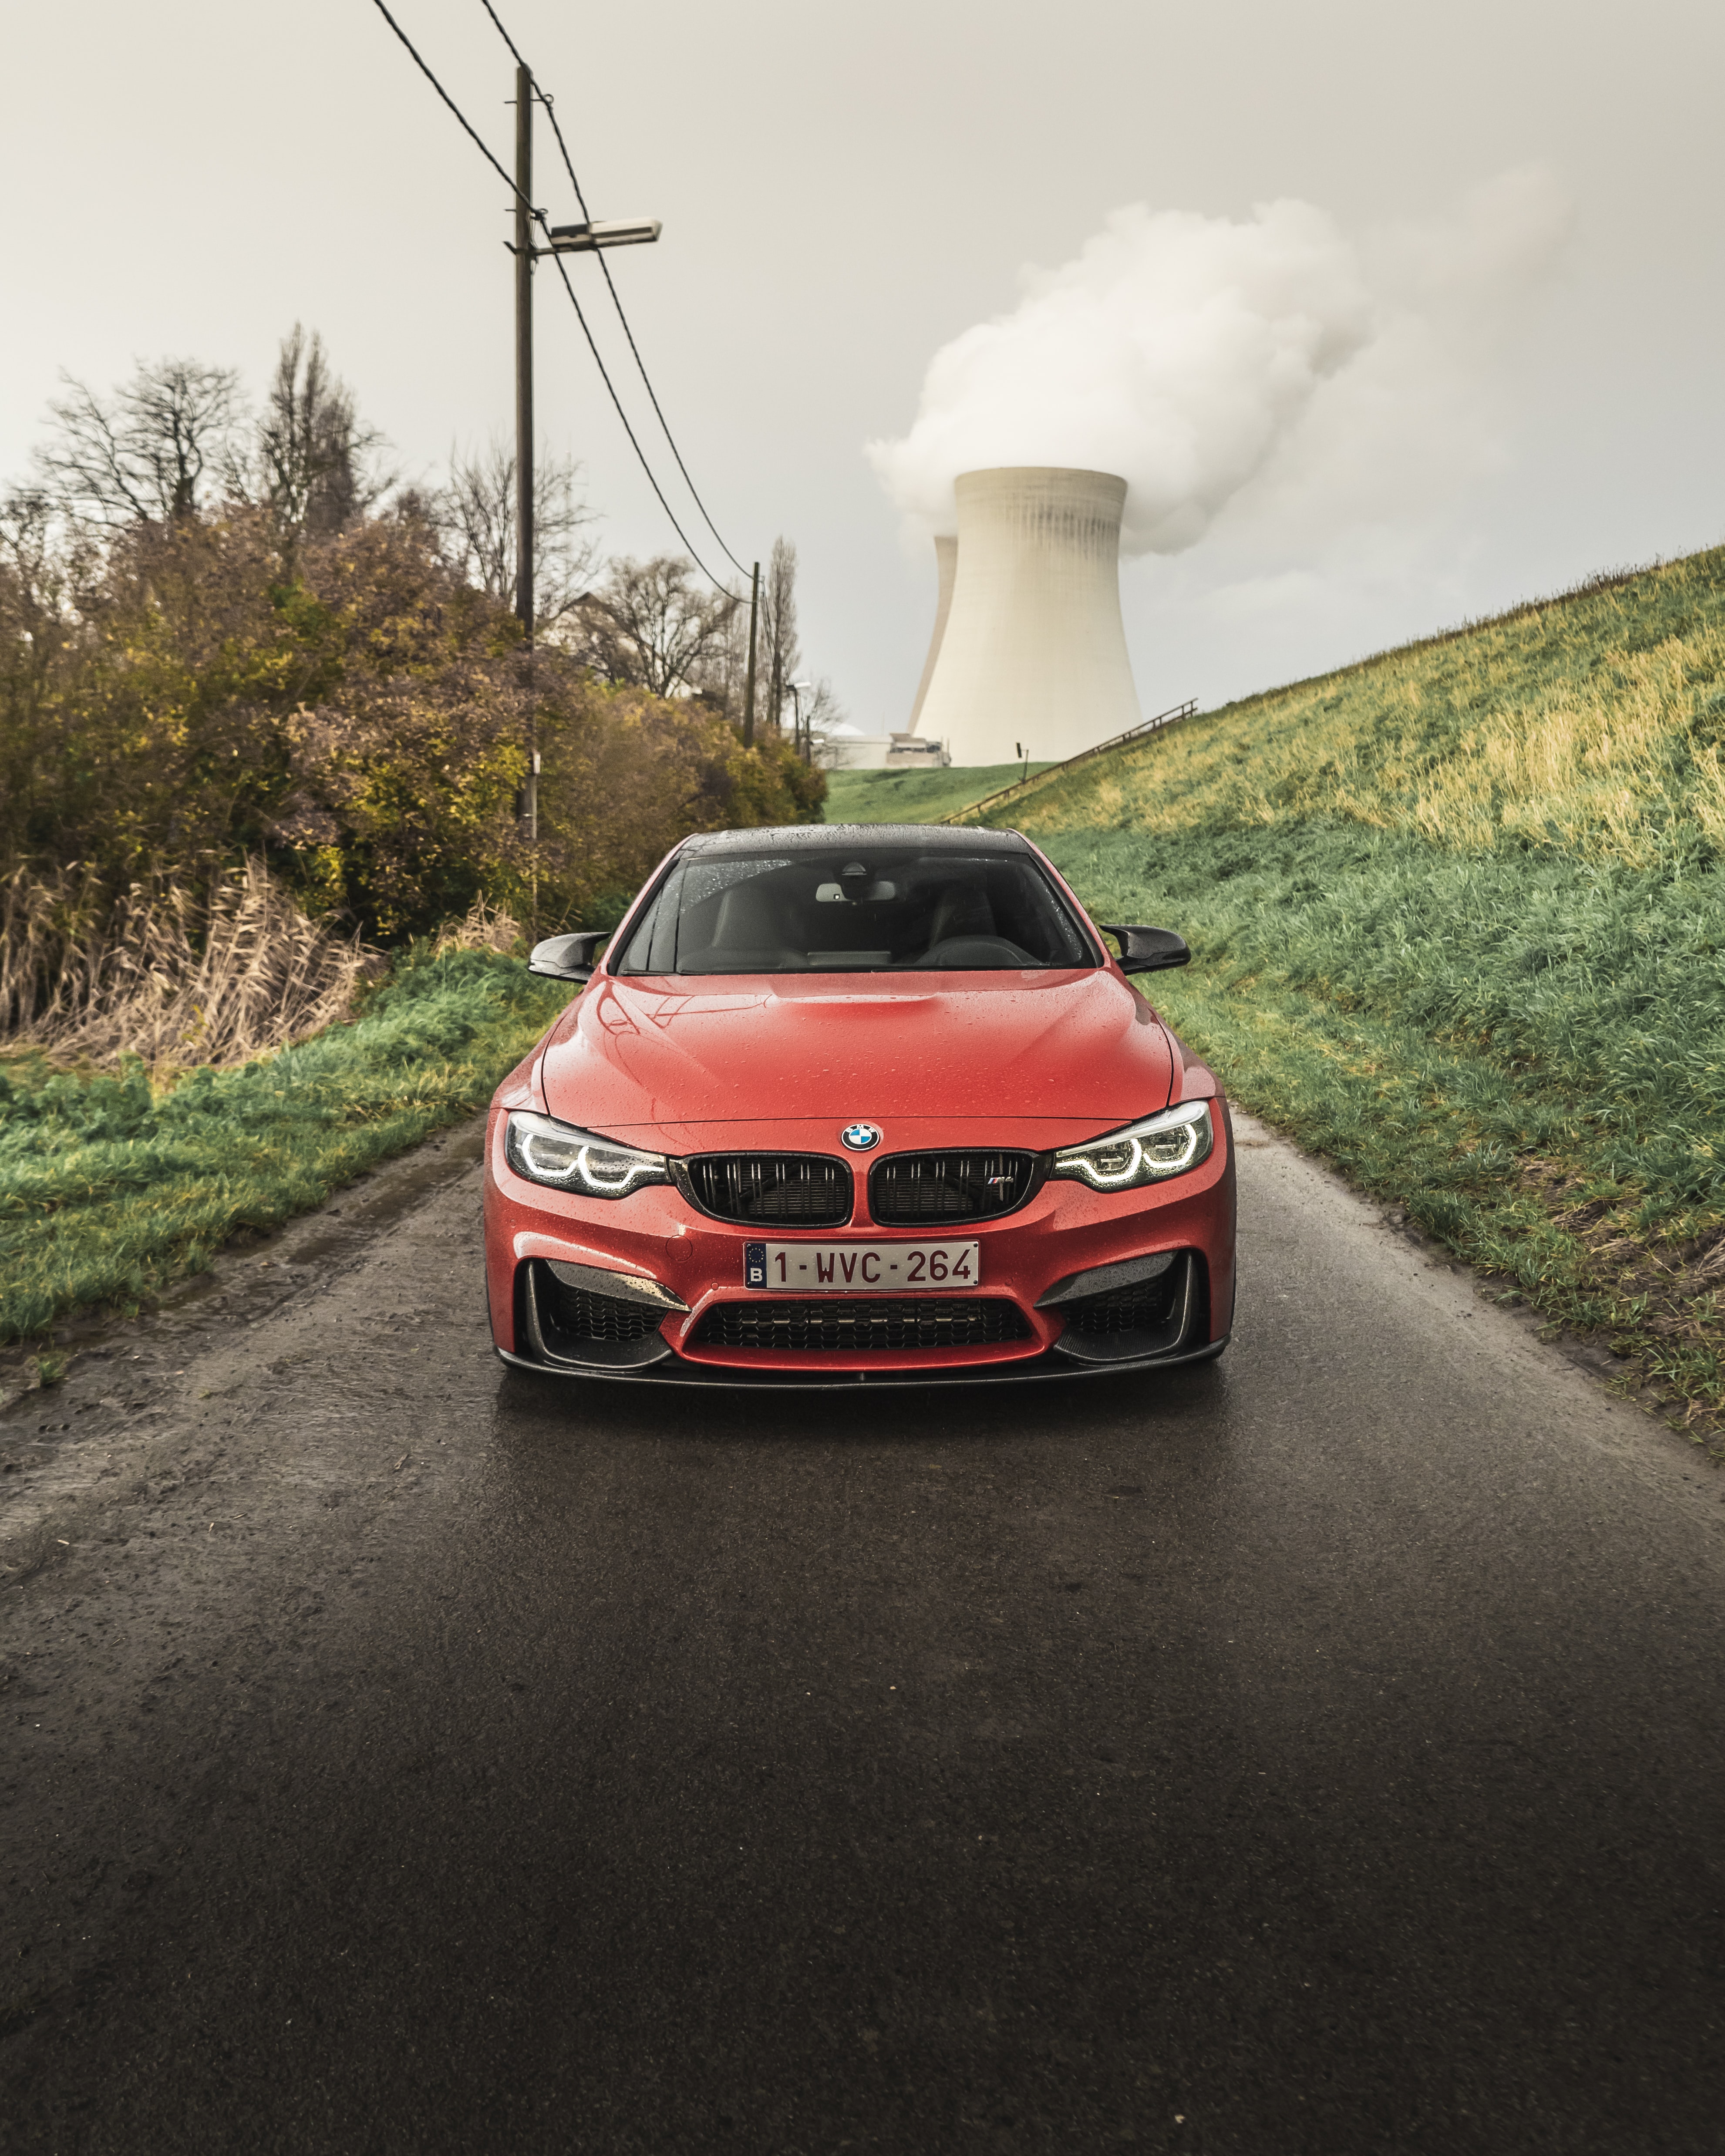 bmw, cars, red, car, front view, bmw m4 iphone wallpaper